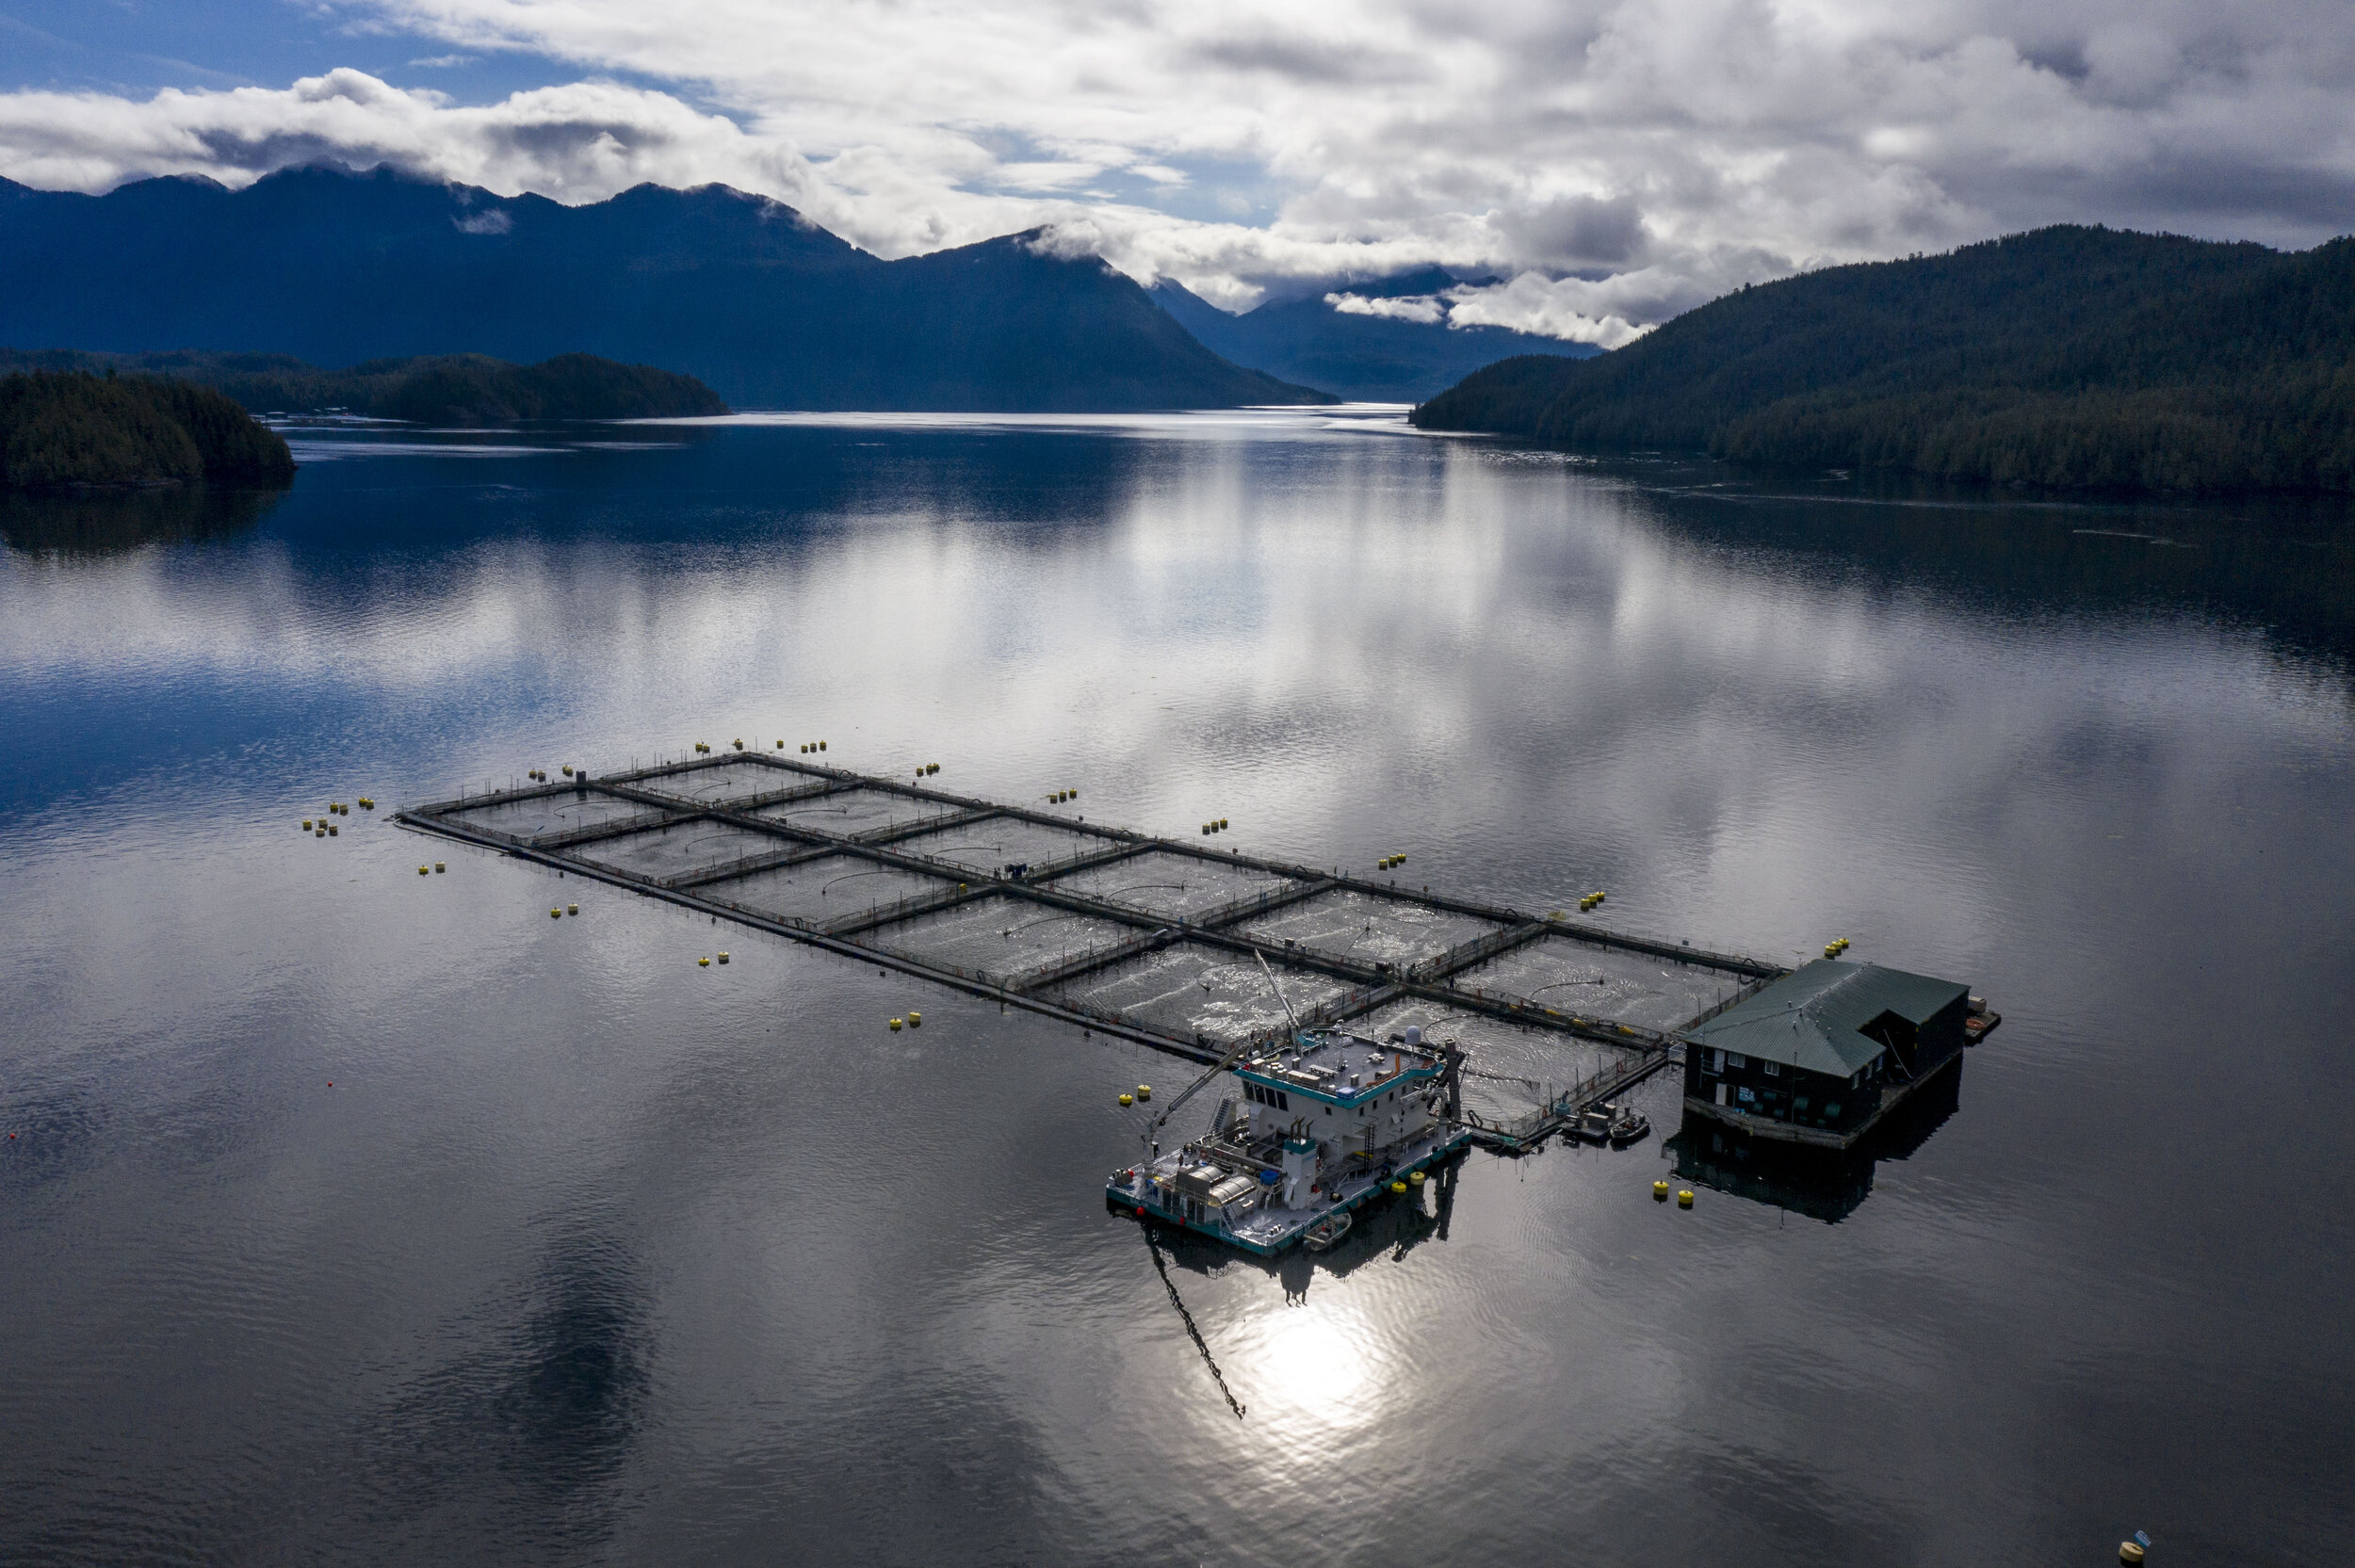  A Cermaq fish farm in Ahousaht First Nation's tradtional territory at Saranac Island in Clayoqout Sound. The boat docked by the farm is set up to pressure wash sea lice off of the Atlantic salmon in the farm. 